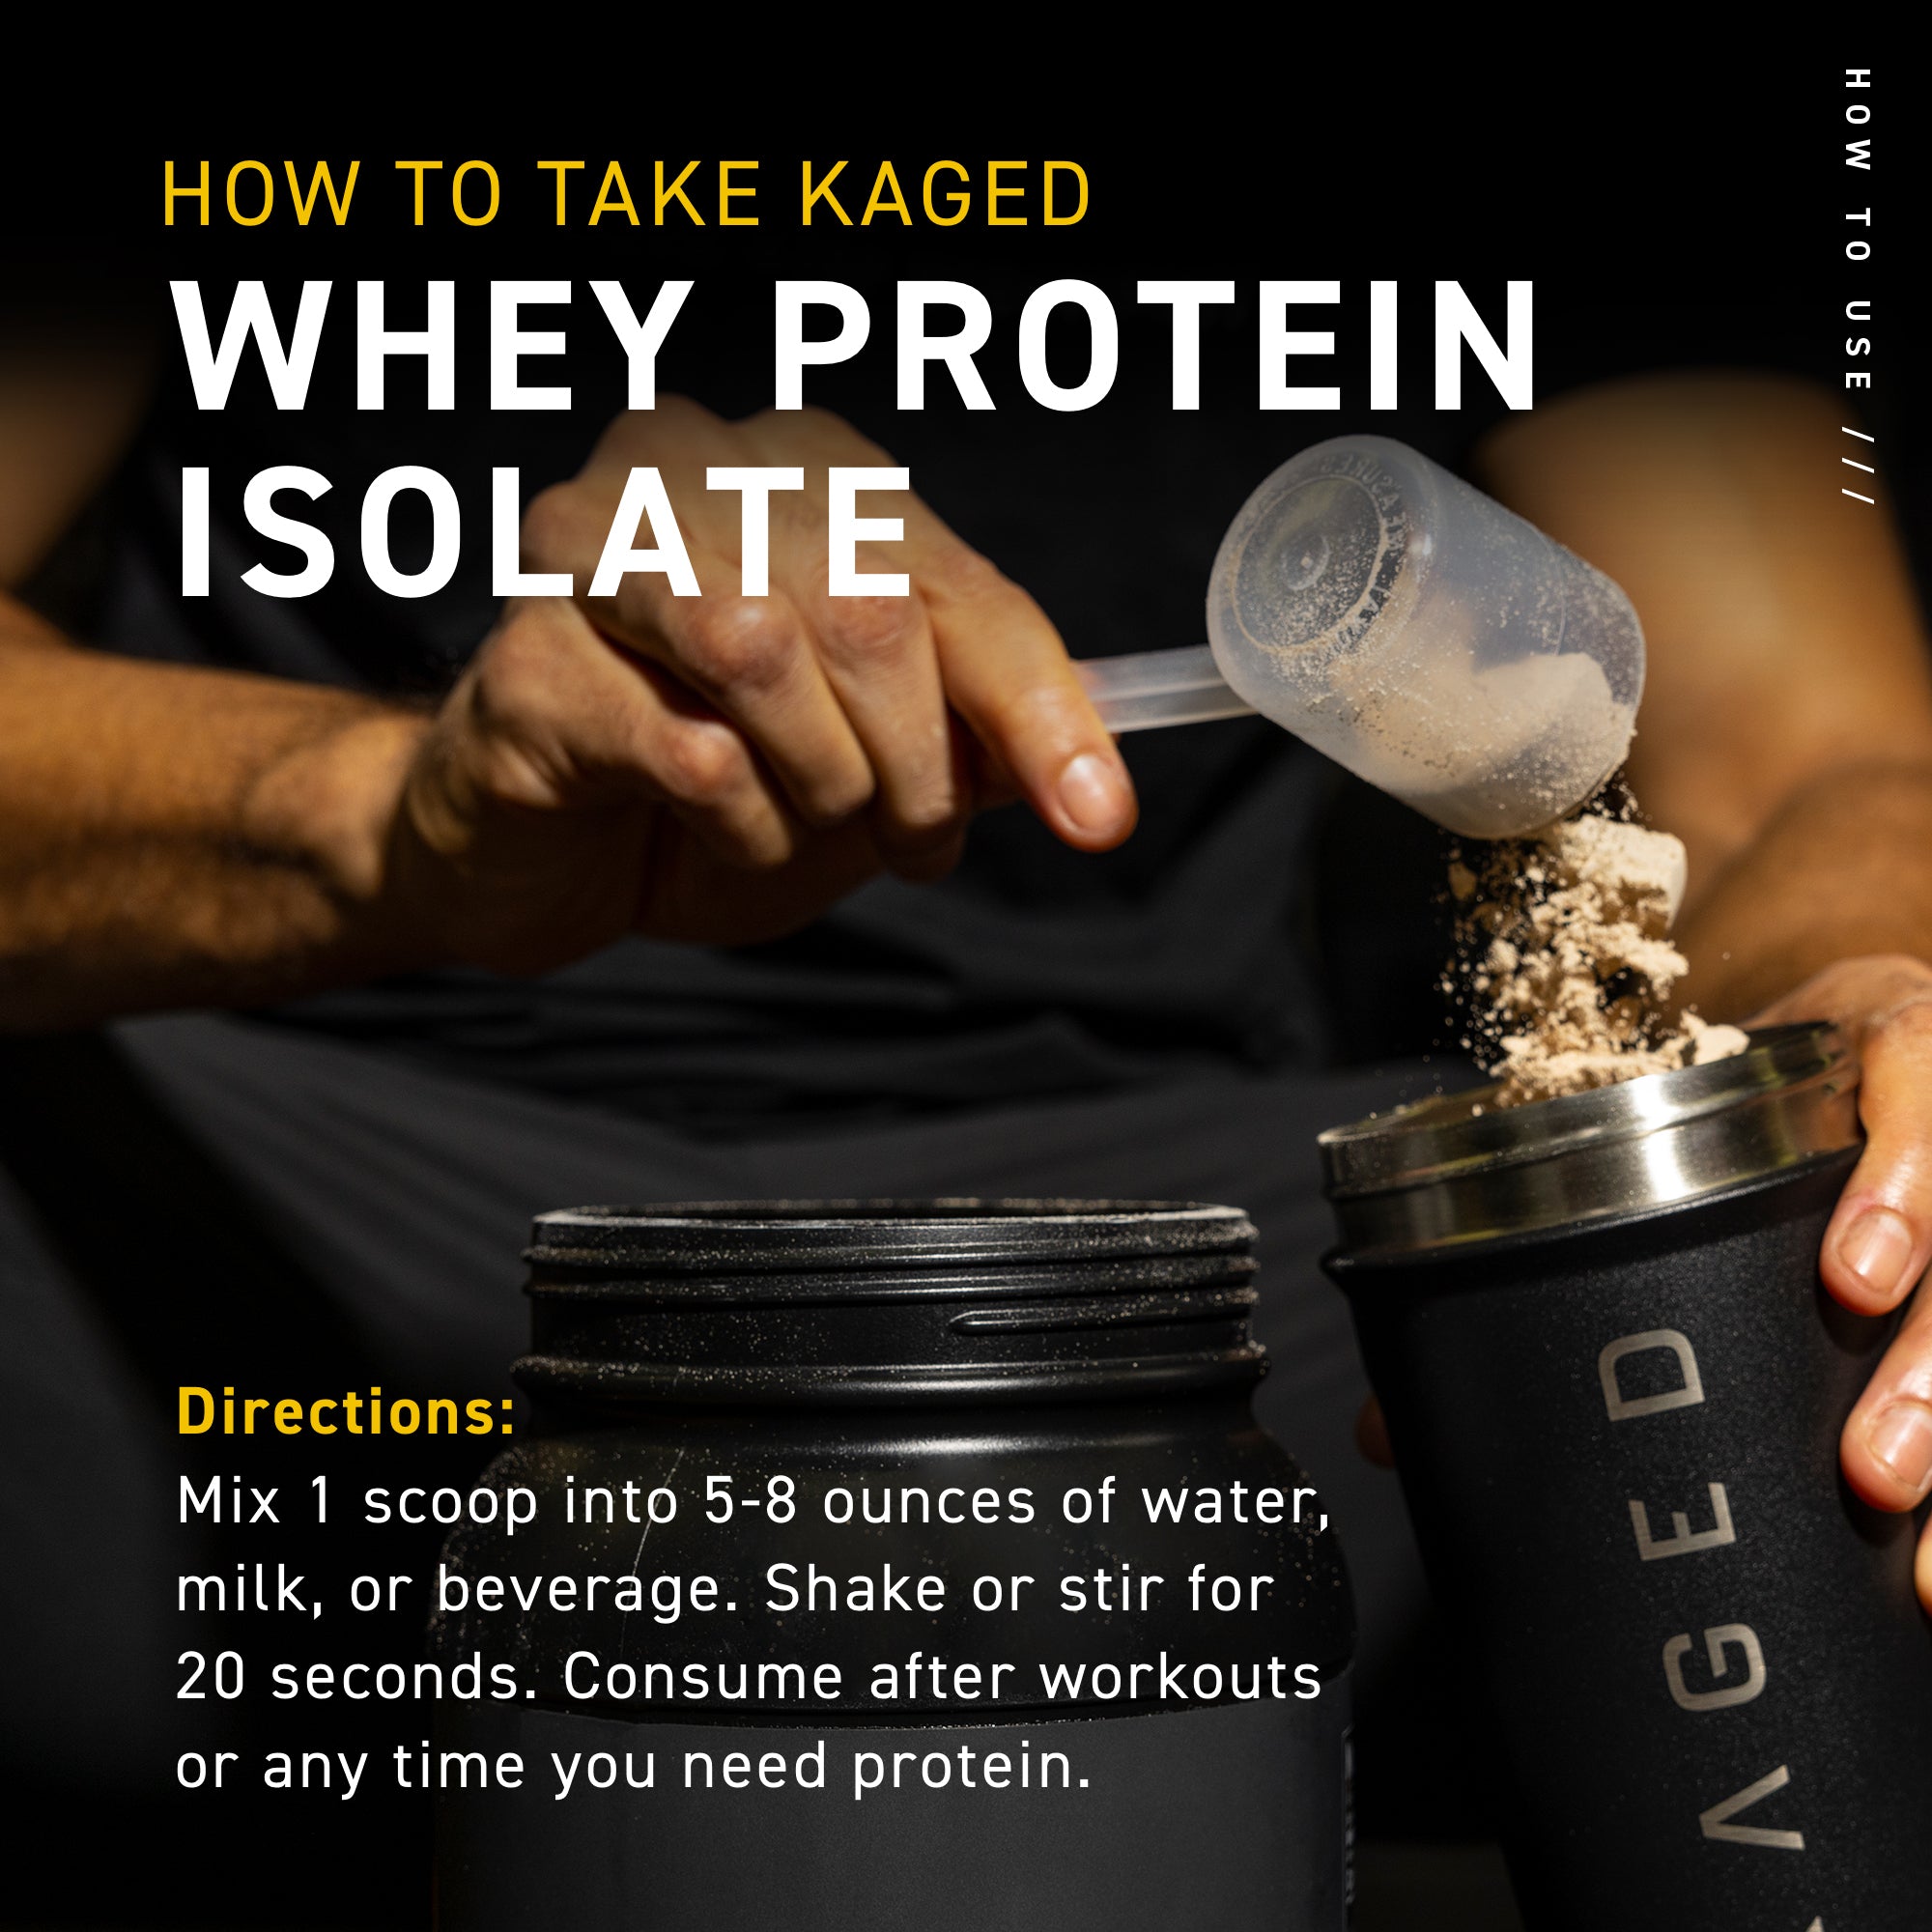 Kaged | Protein Isolate Fast Digesting Clean Protein